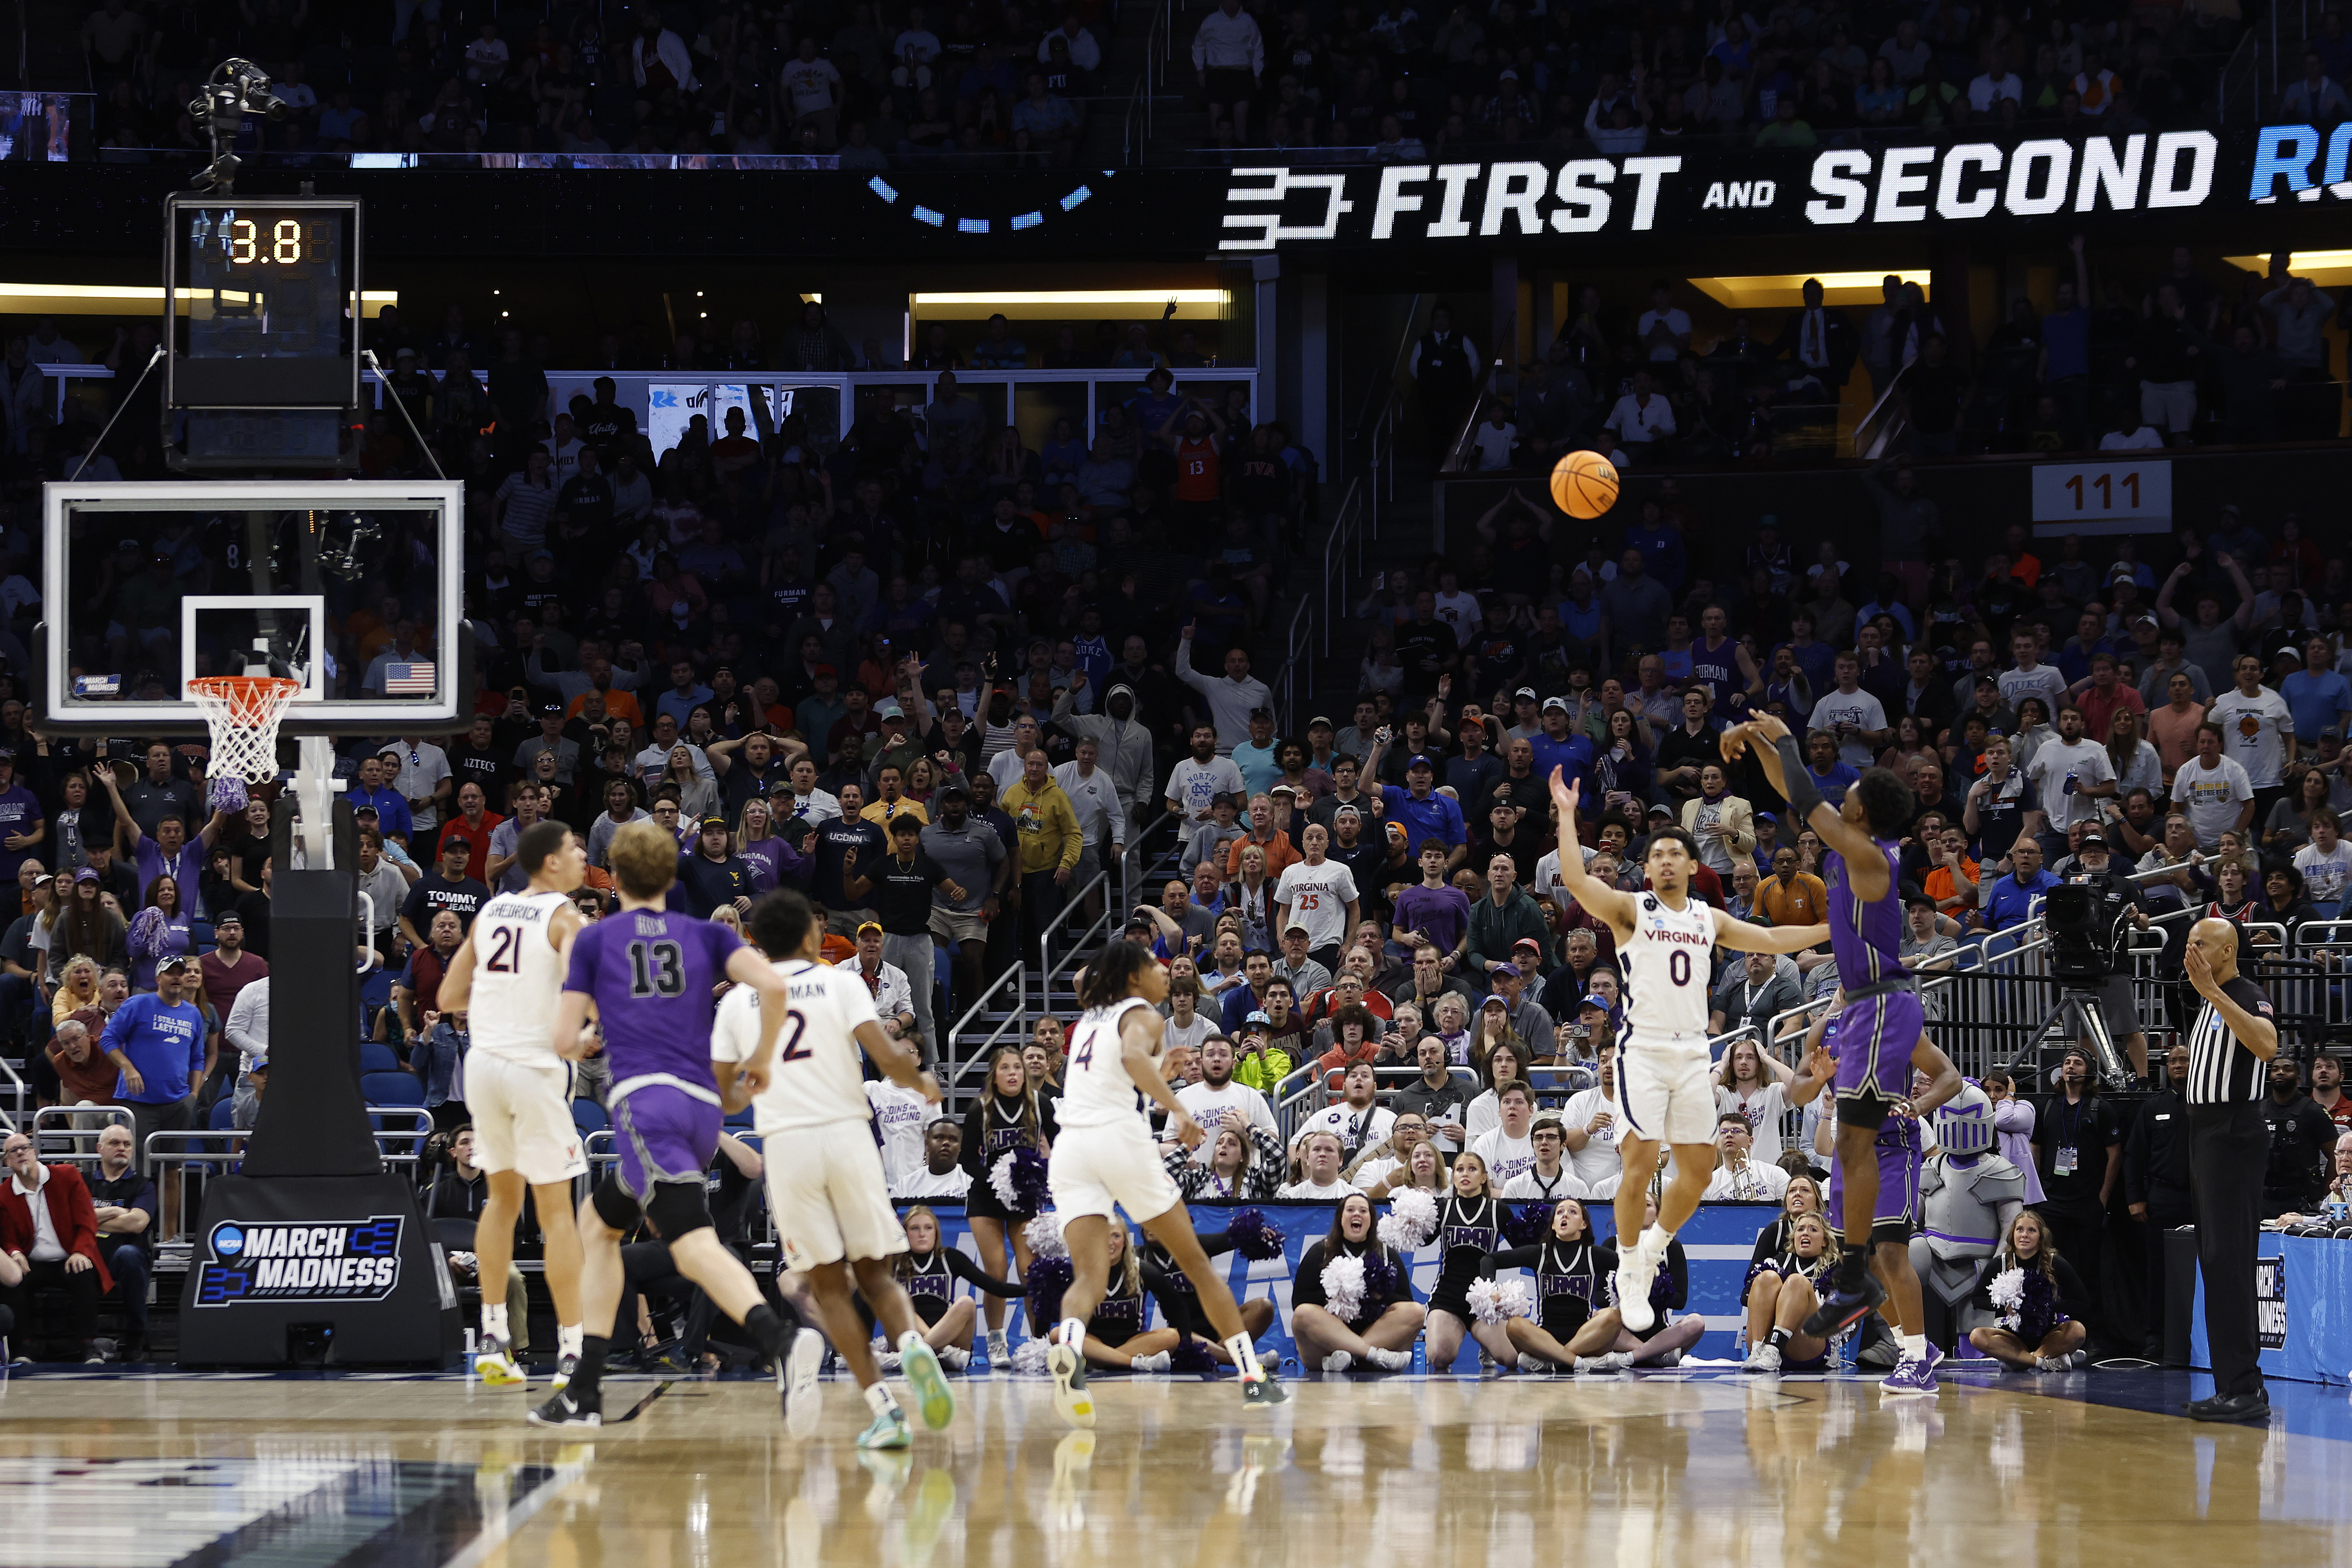 JP Pegues #1 of the Furman Paladins shoots the game winning three point basket against the Virginia Cavaliers during the second half in the first round of the NCAA Men's Basketball Tournament at Amway Center on March 16, 2023 in Orlando, Florida.